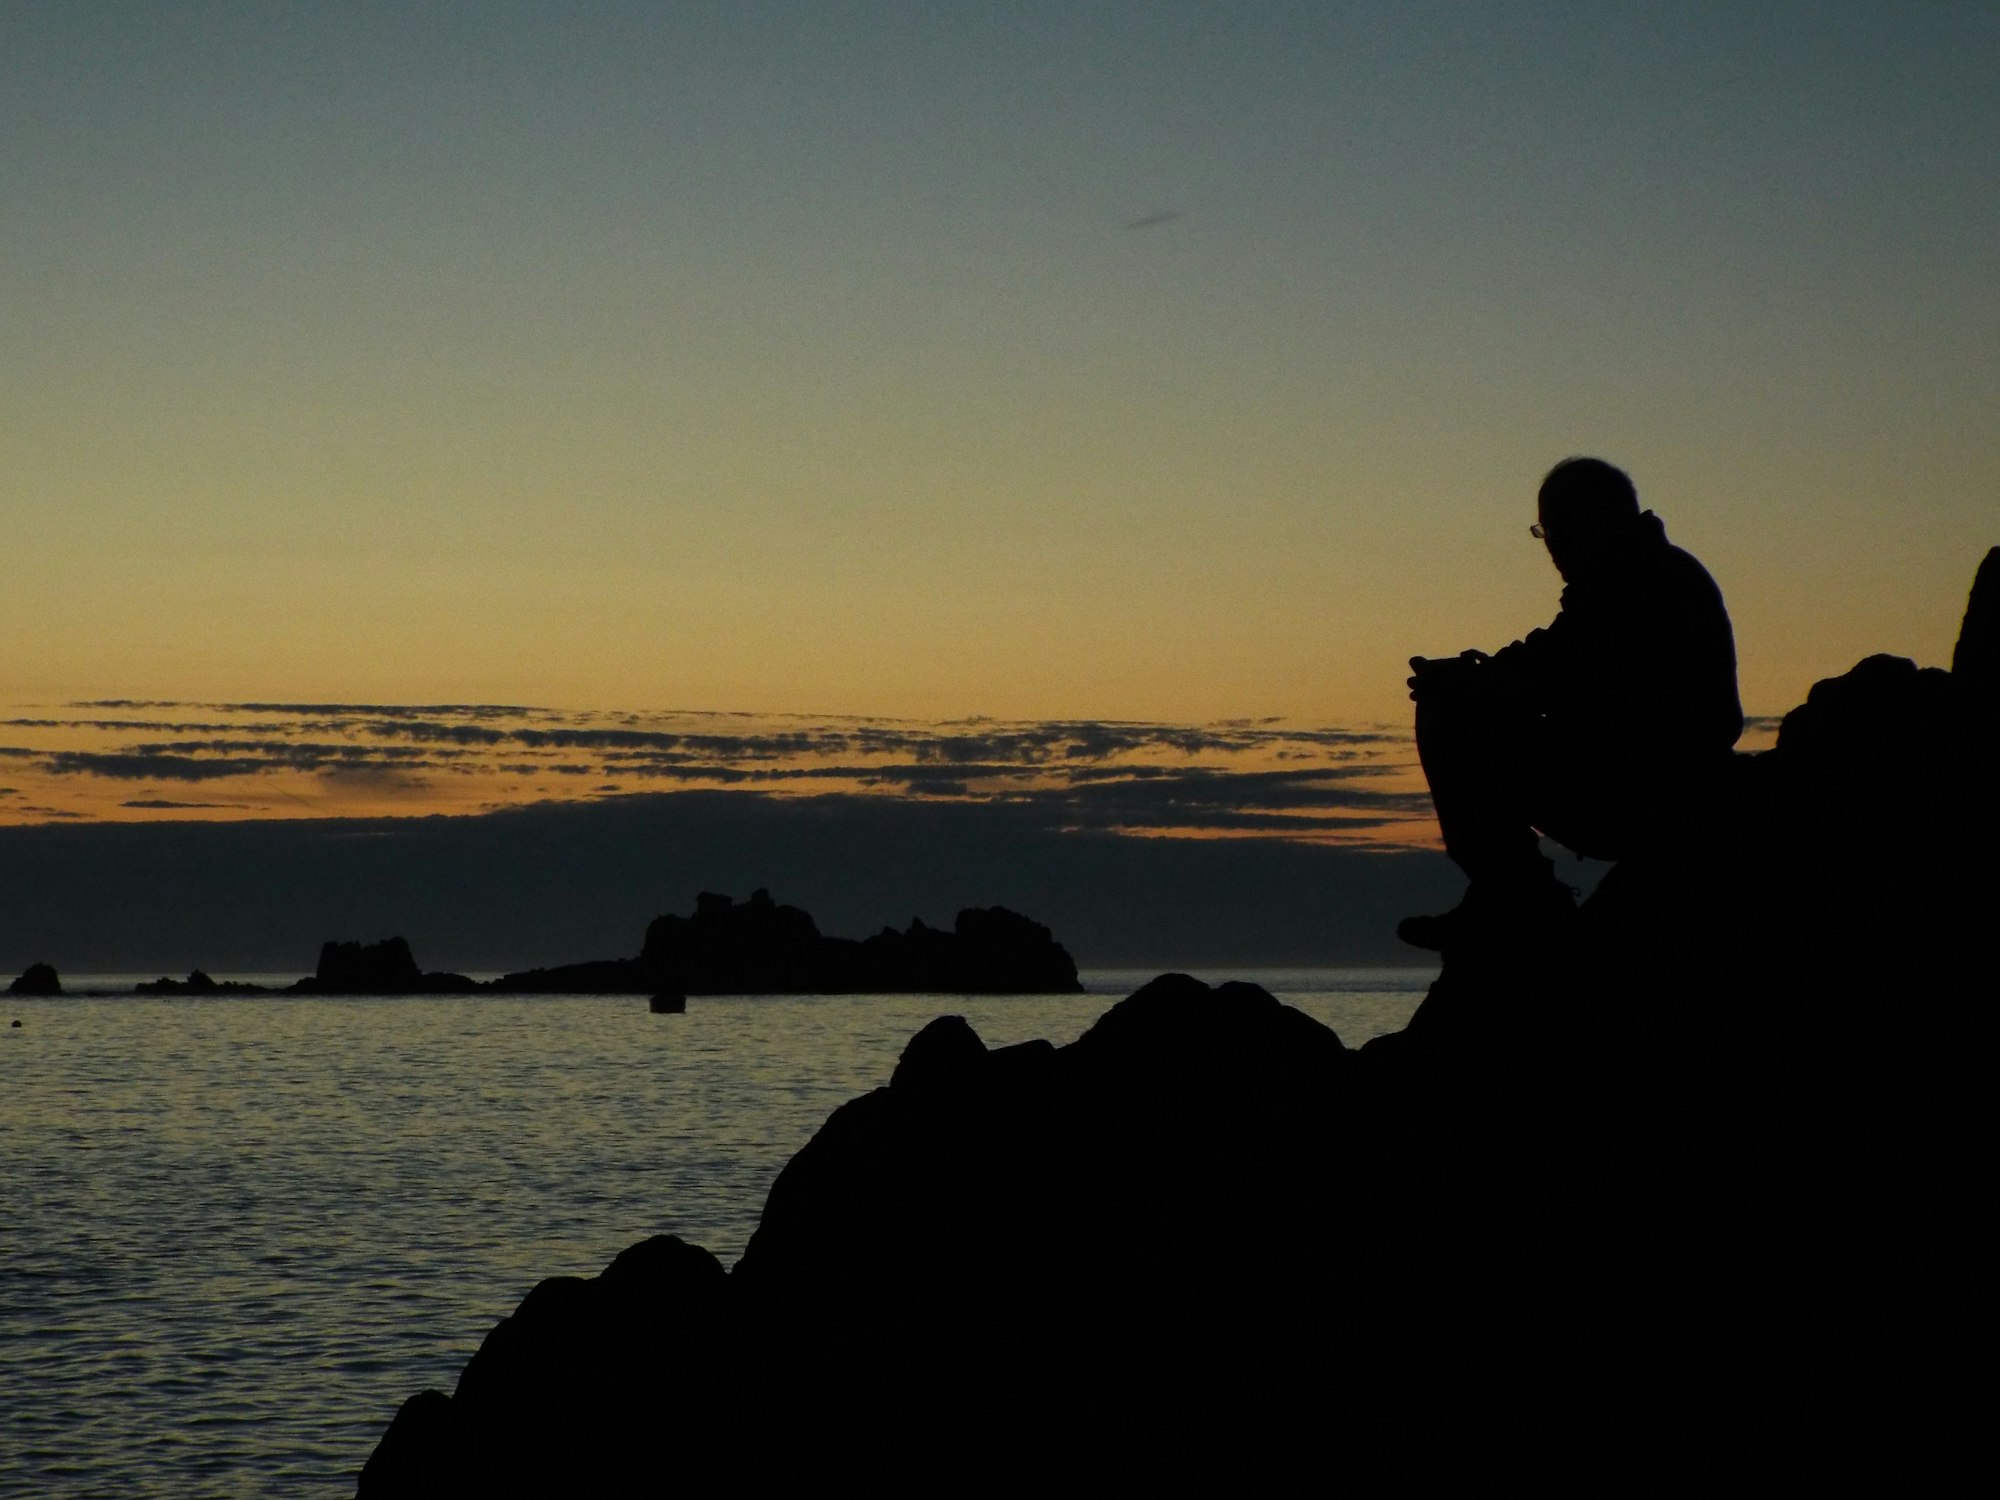 A silhouette of a man sitting on a rock looking out at a golden sunset sea sky.